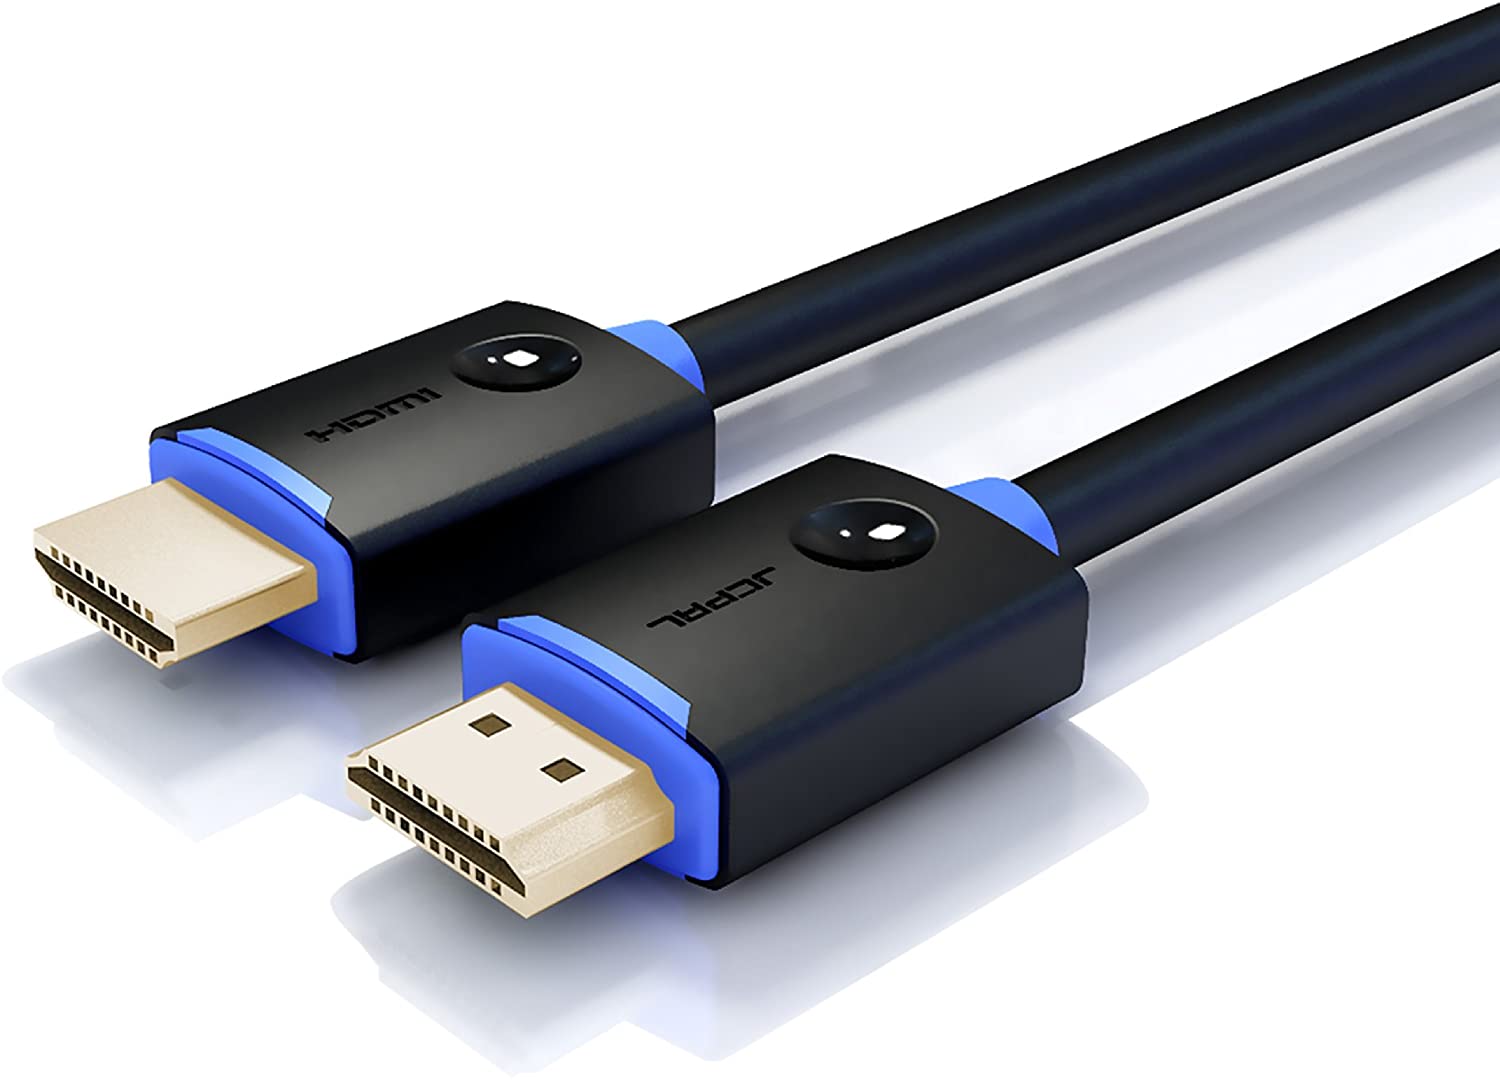 JCPAL High-Speed HDMI Cable CE Verrosa Retail Inc 